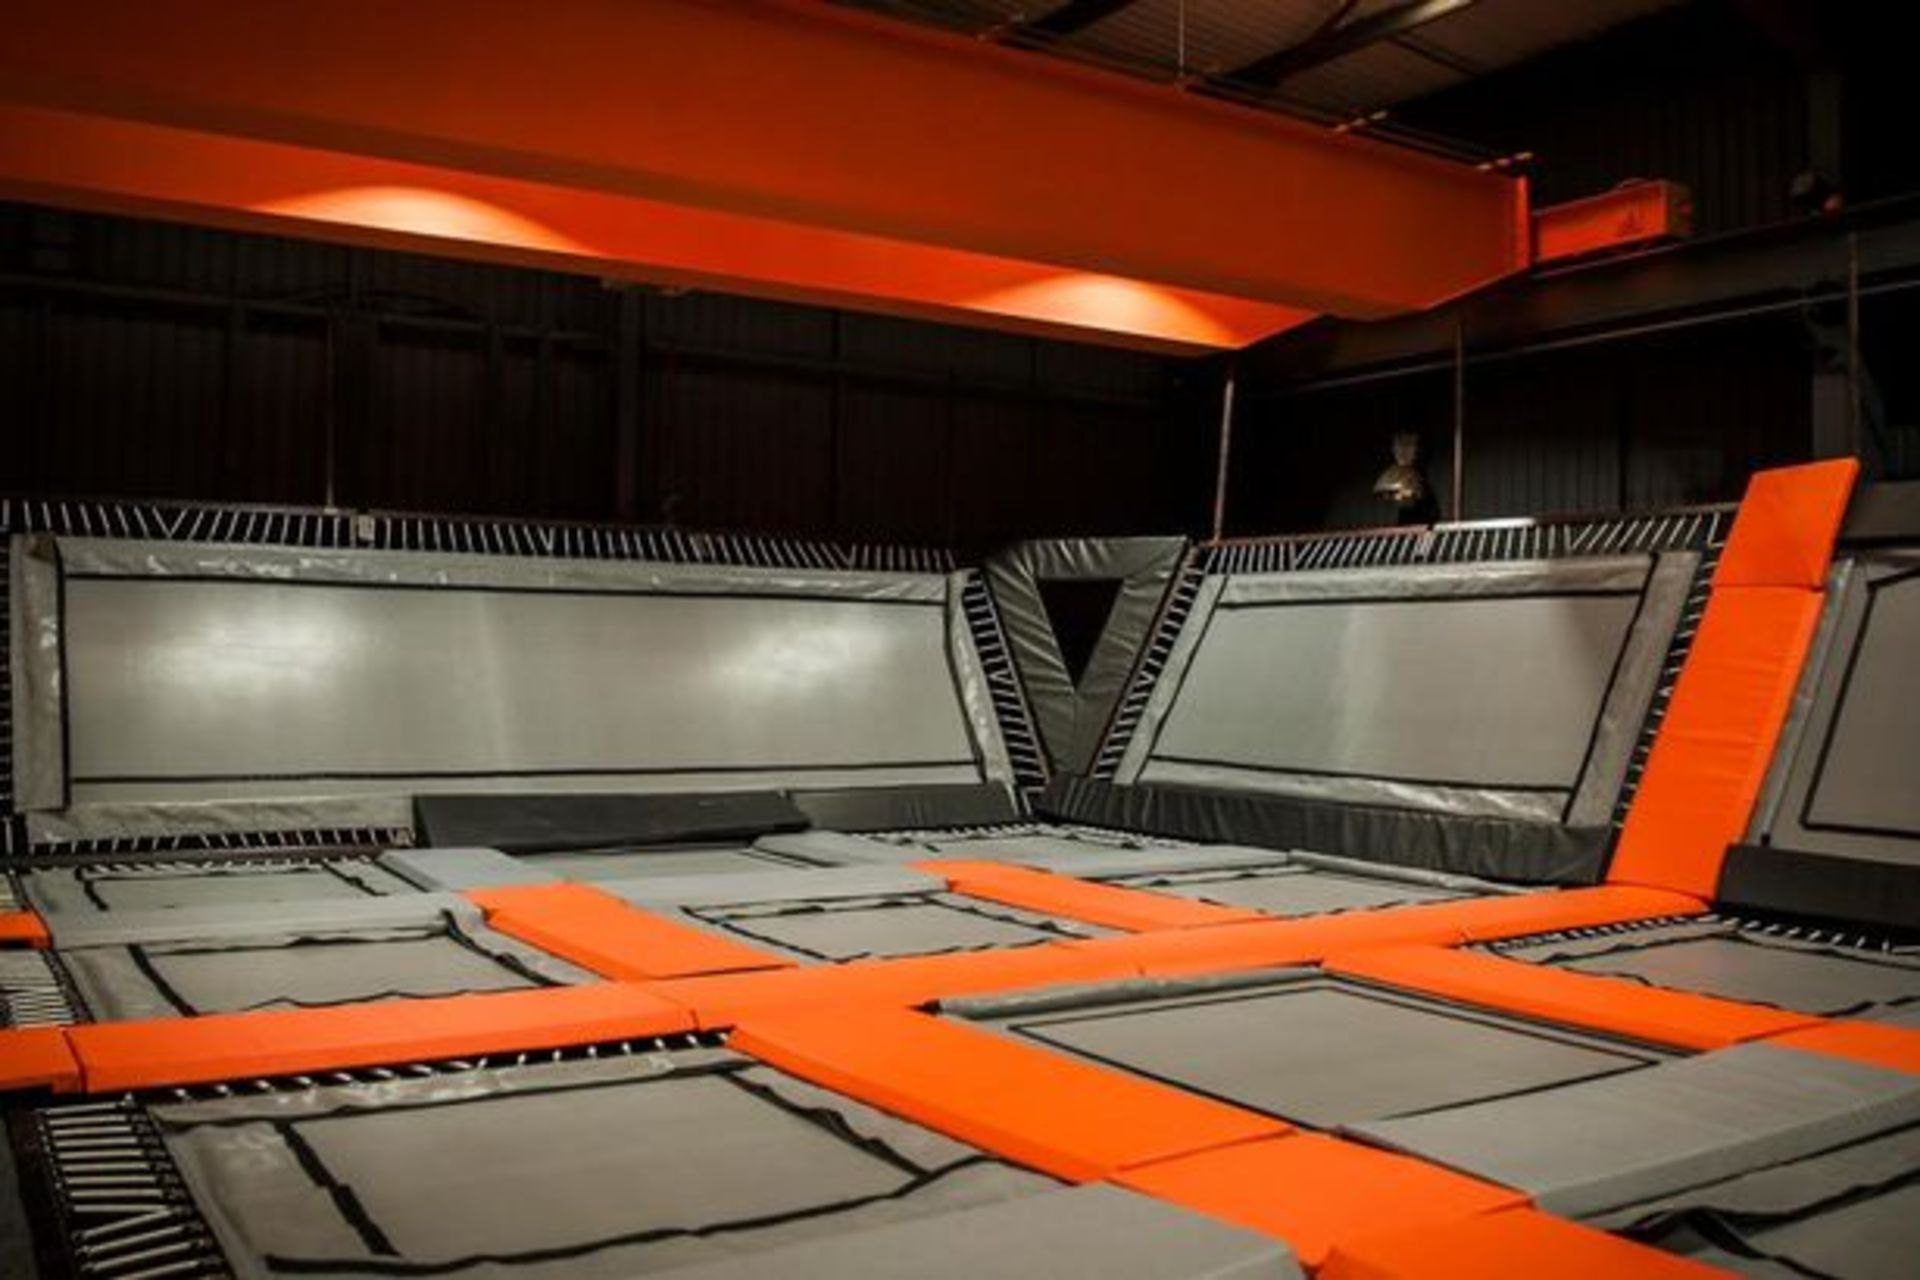 1 x Large Trampoline Park - Disassembled - Includes Dodgeball Arena And Jump Tower - CL766  - - Image 83 of 99